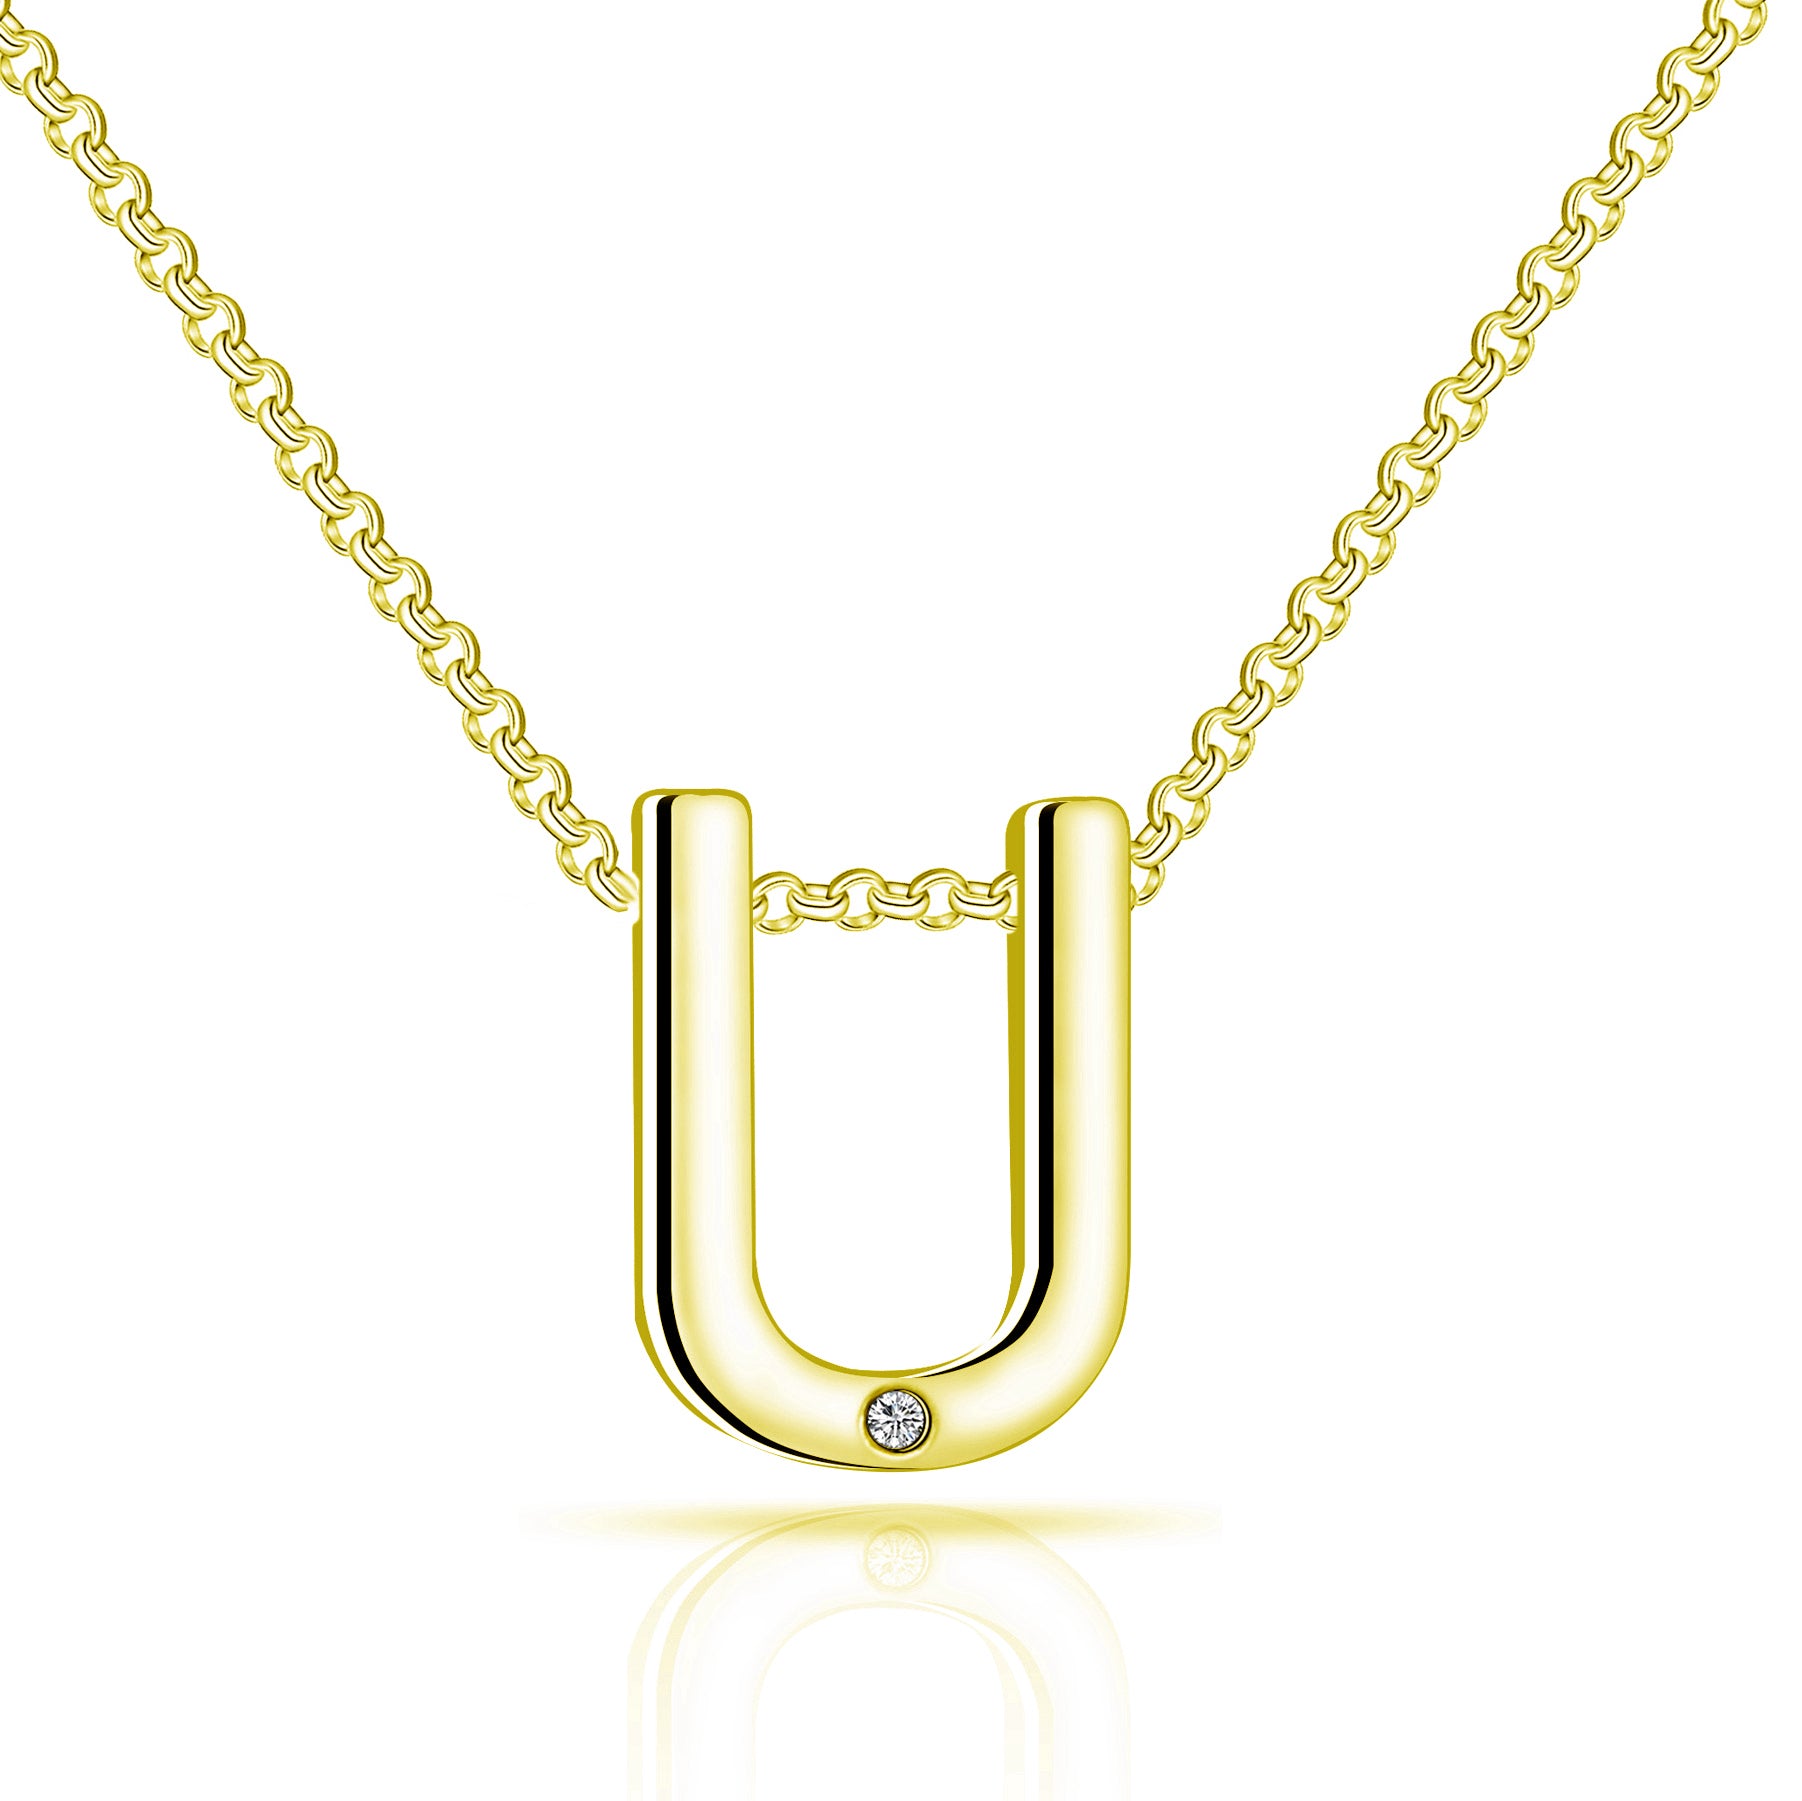 Gold Plated Initial Necklace Letter U Created with Zircondia® Crystals by Philip Jones Jewellery